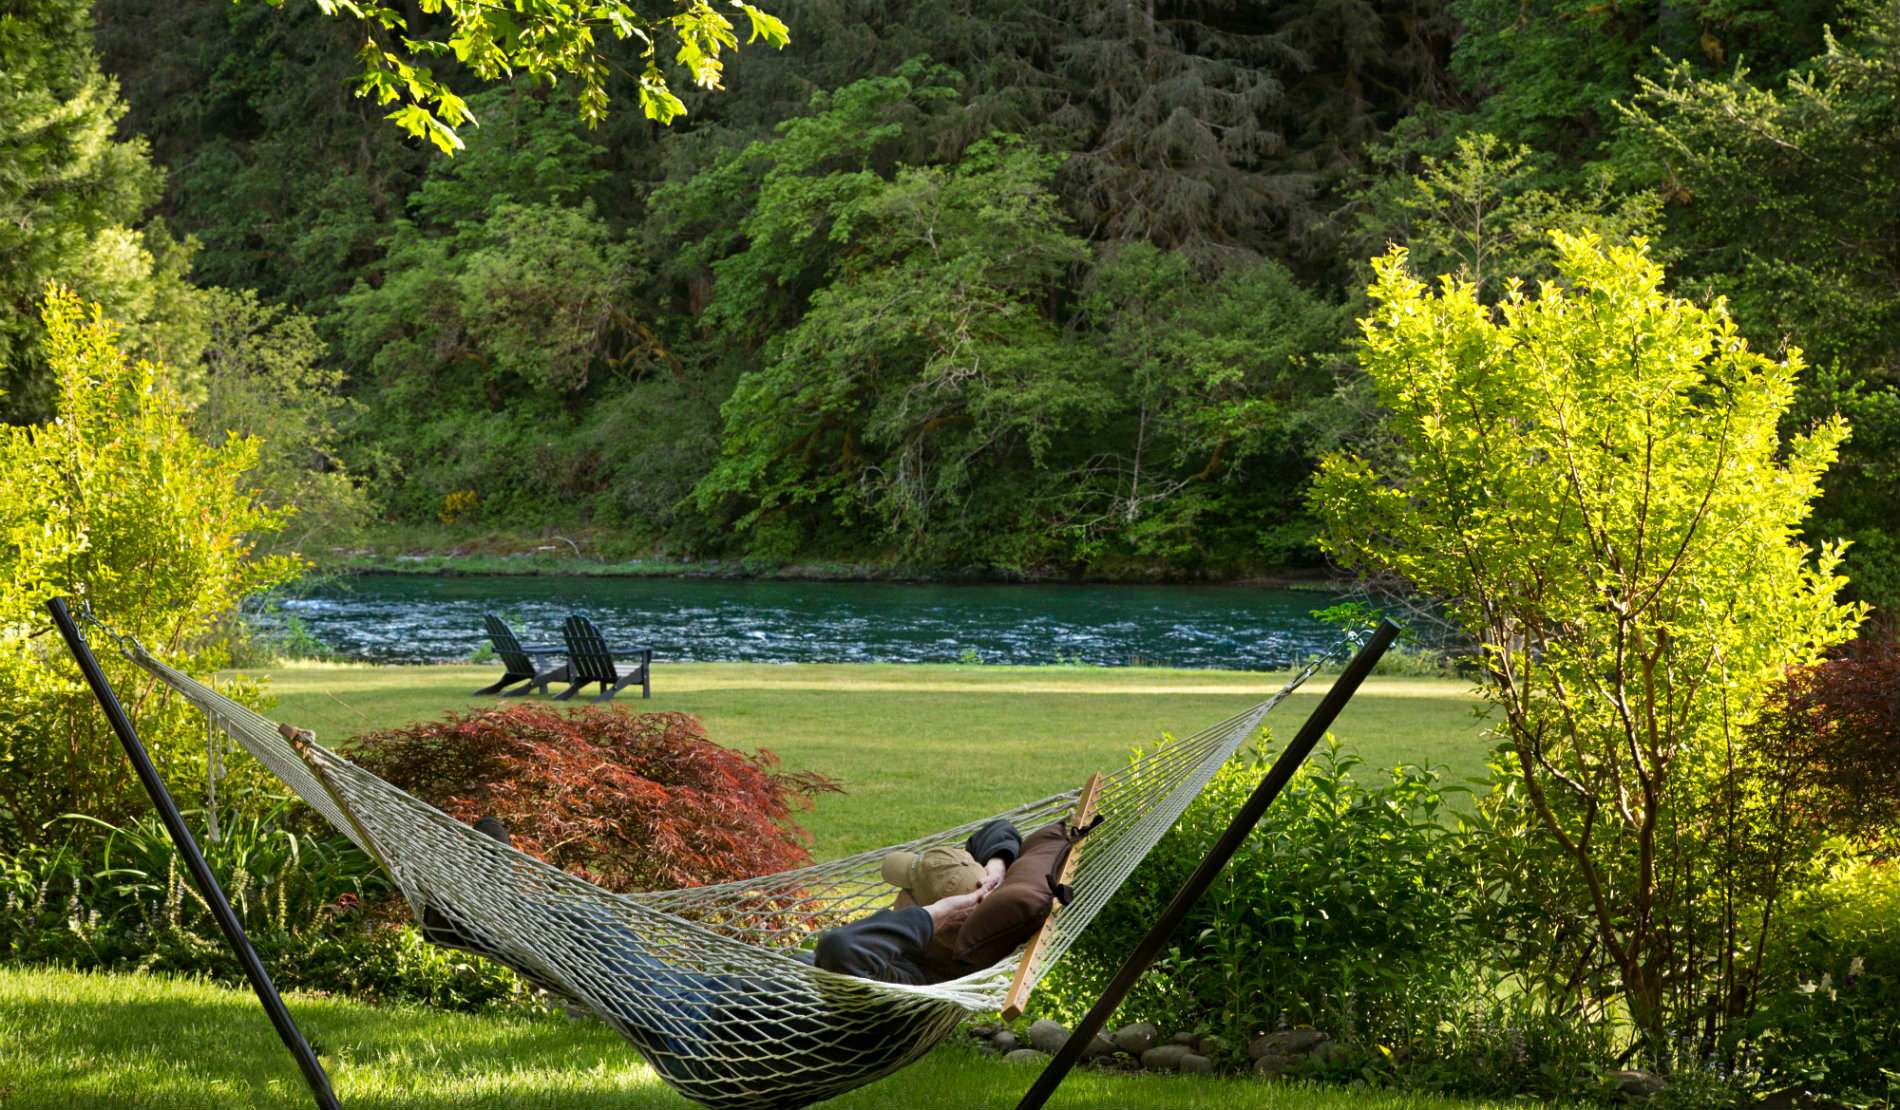 A man reclines in a hammock with green grass, bushes and trees and a flowing river.